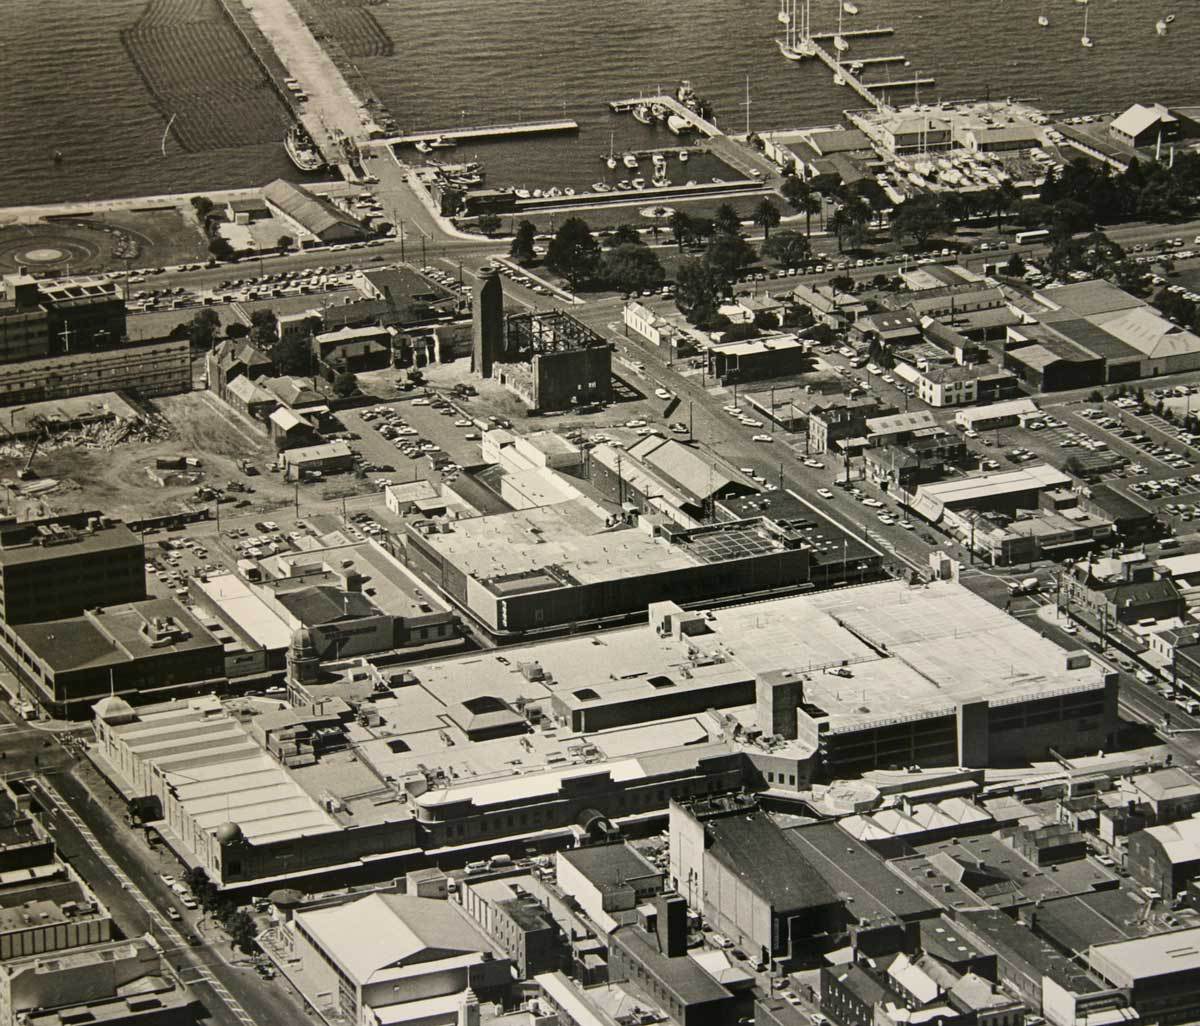 Just a few of our favourite aerial views from the archives for you to enjoy this #ThrowbackThursday. 📷1 La Trobe Tce 1982 📷2 Market Square c1980 📷3 Corio Quay c1970 📷4 Demolition works for Bay City Plaza 1985 #tbt #Geelong #aerialphotography